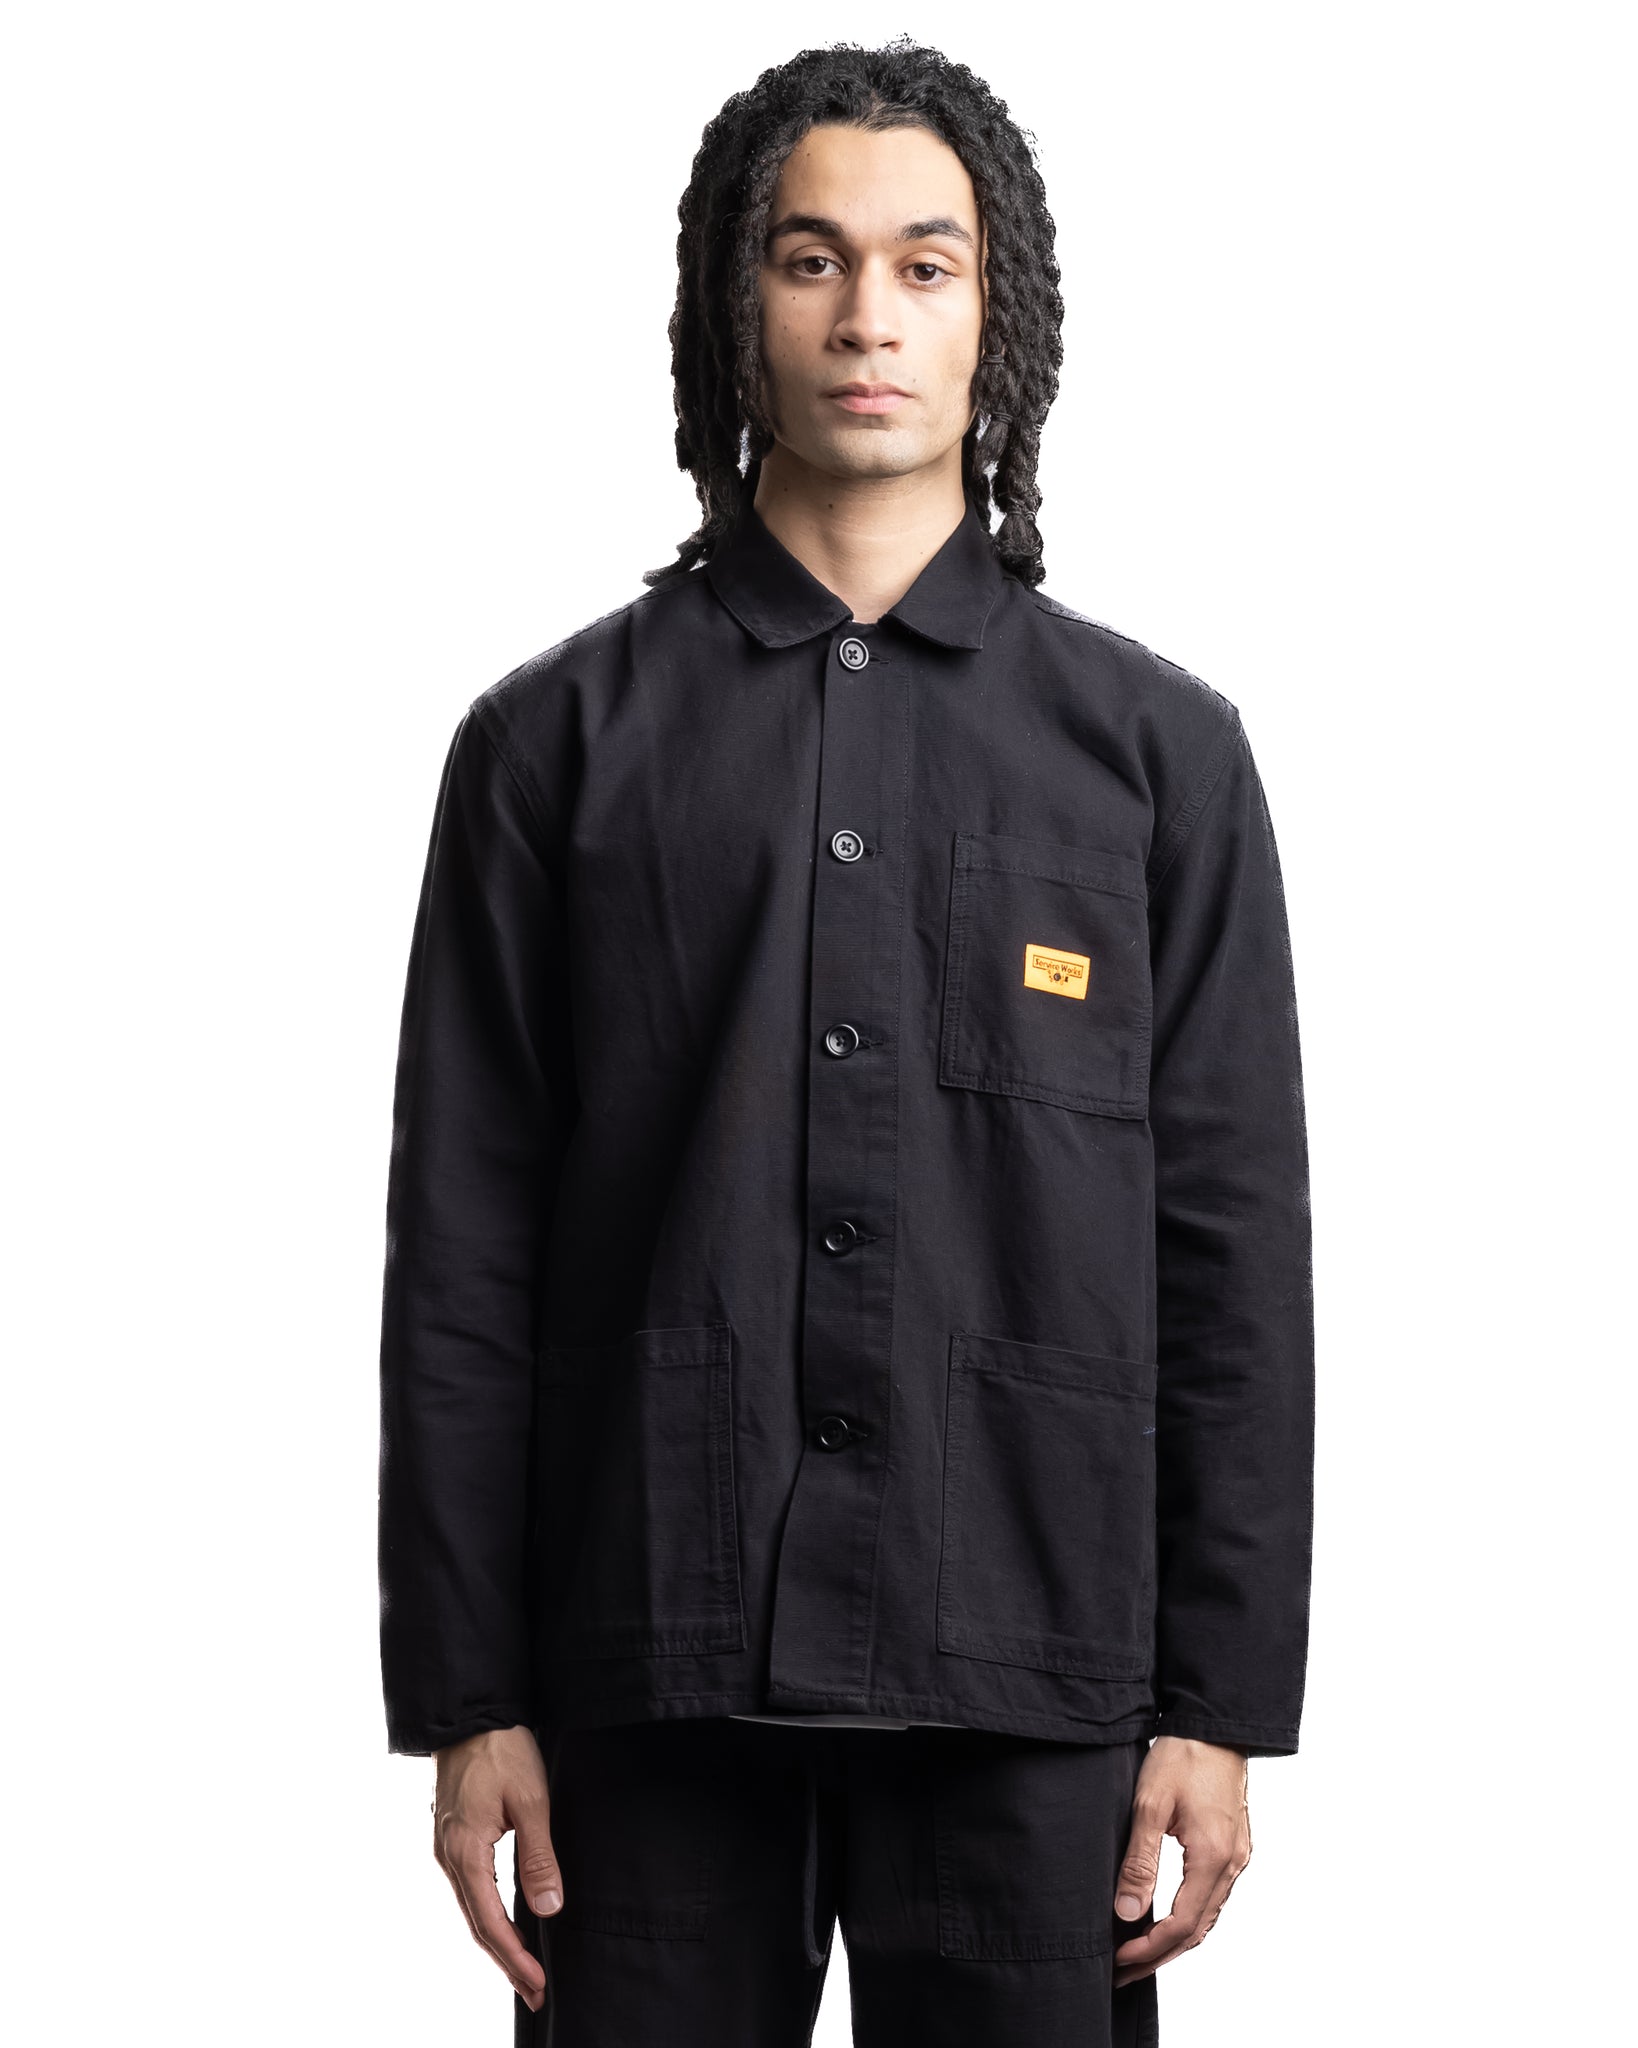 Service Works Canvas Coverall Jacket Black